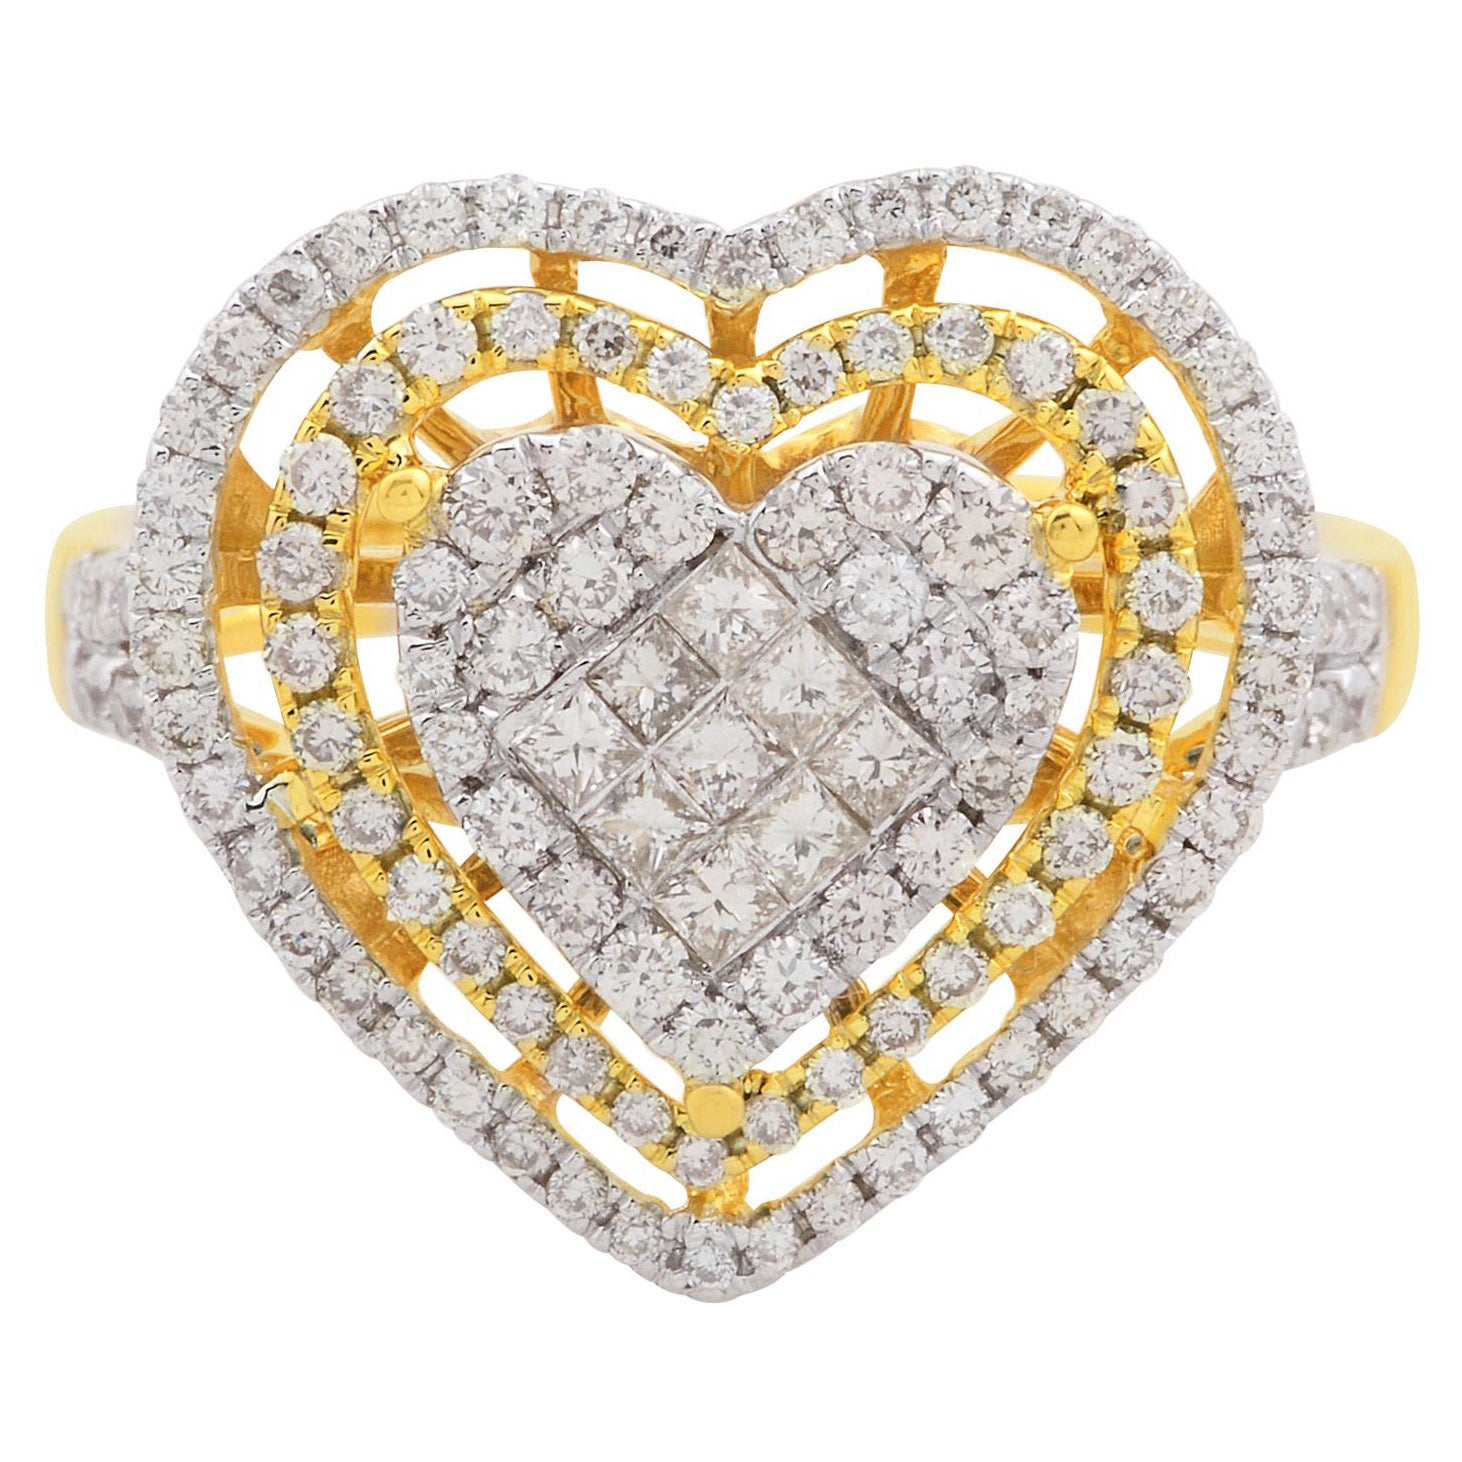 For Sale:  1.30 Carat SI Clarity HI Color Diamond Pave Heart Ring 18k Yellow Gold Jewelry